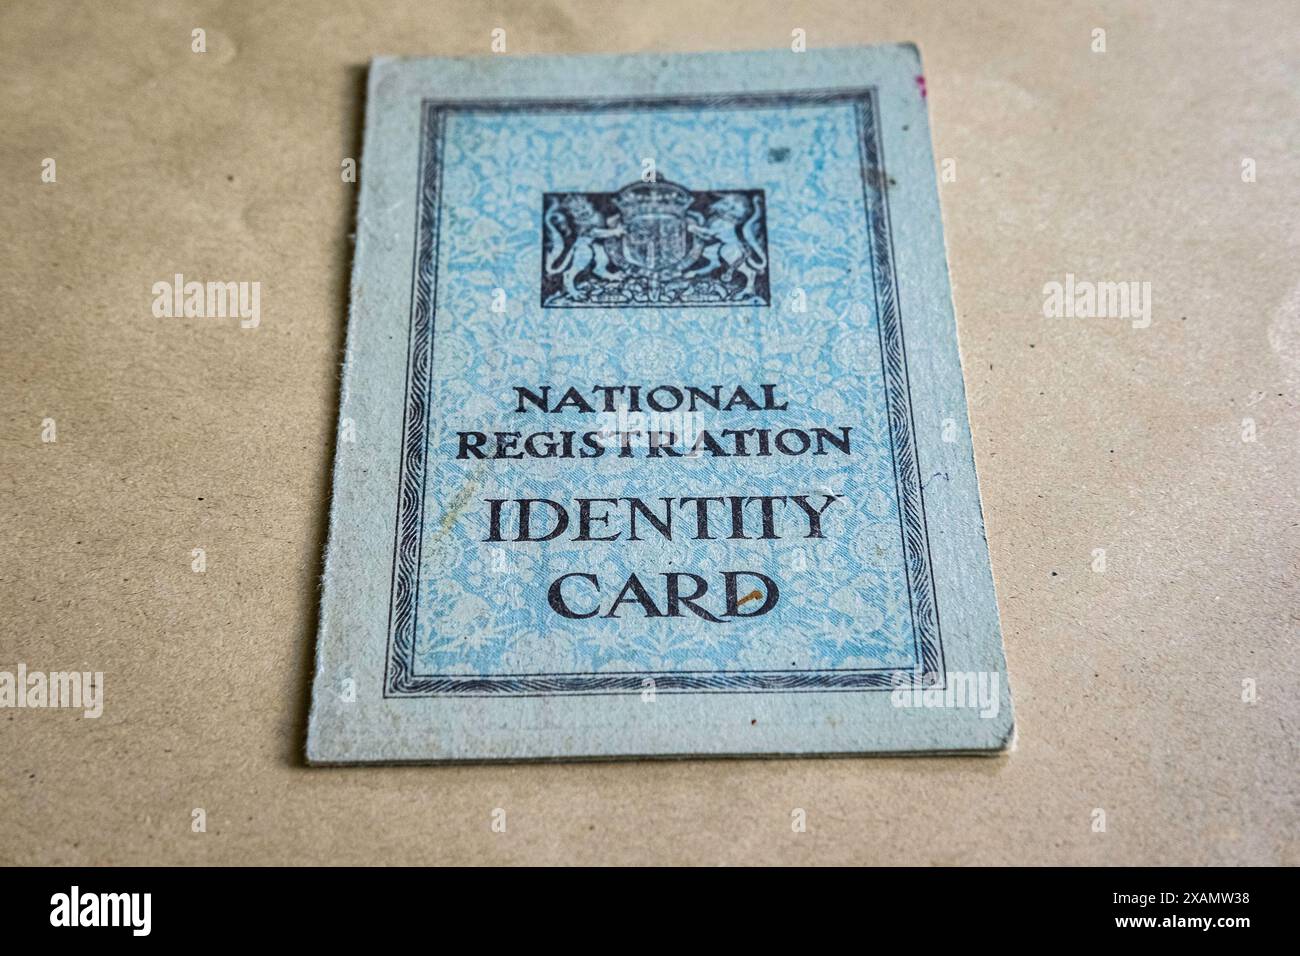 National Registration Identity Card from 1940's Britain. Stock Photo